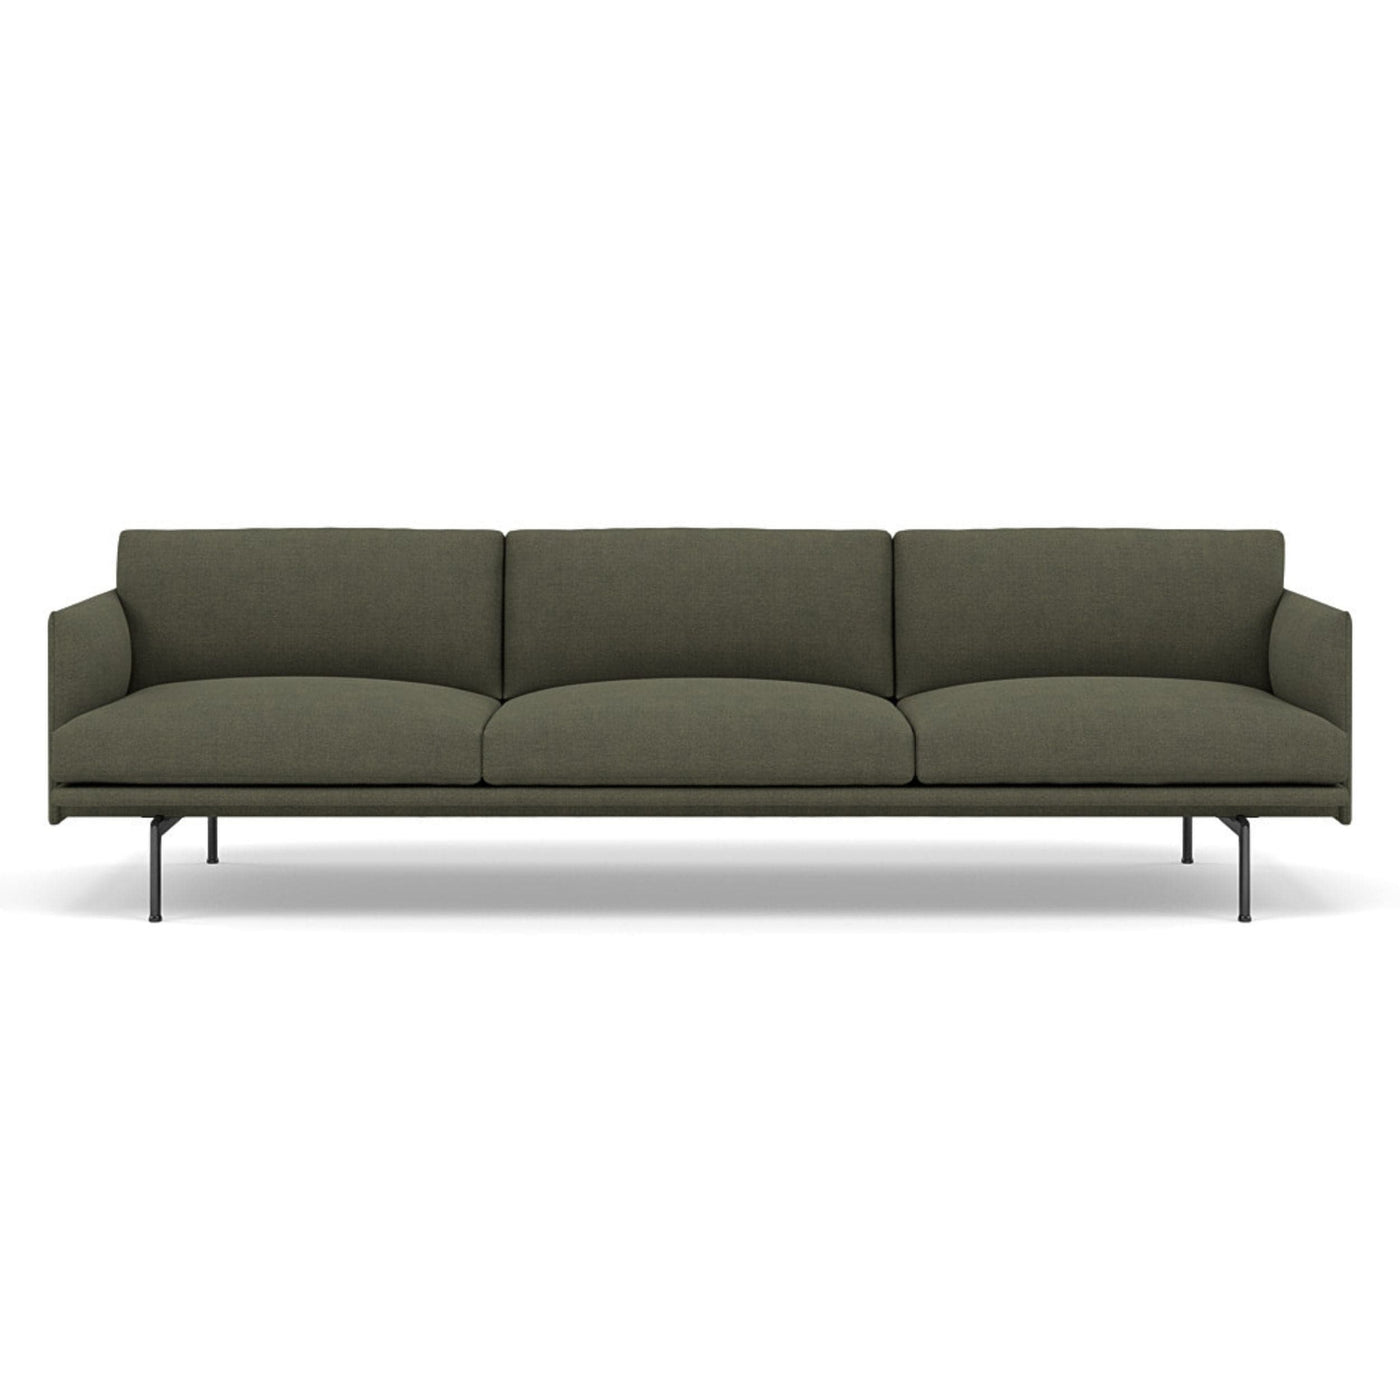 muuto outline 3.5 seater sofa in fiord 961 grey green and black legs. Made to order from someday designs. #colour_fiord-961